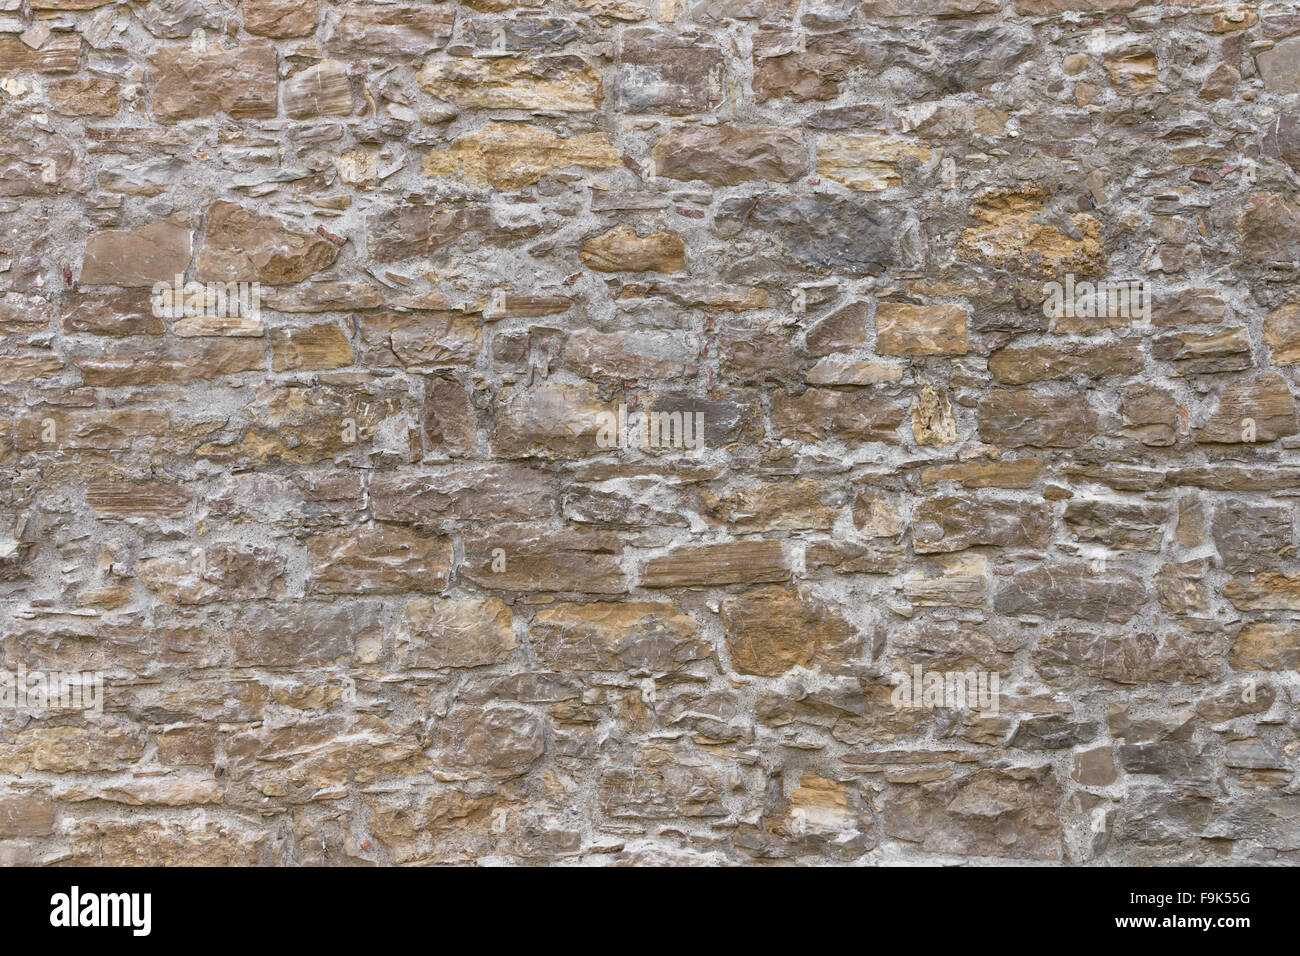 Details of an old restored wall in a religious context Stock Photo